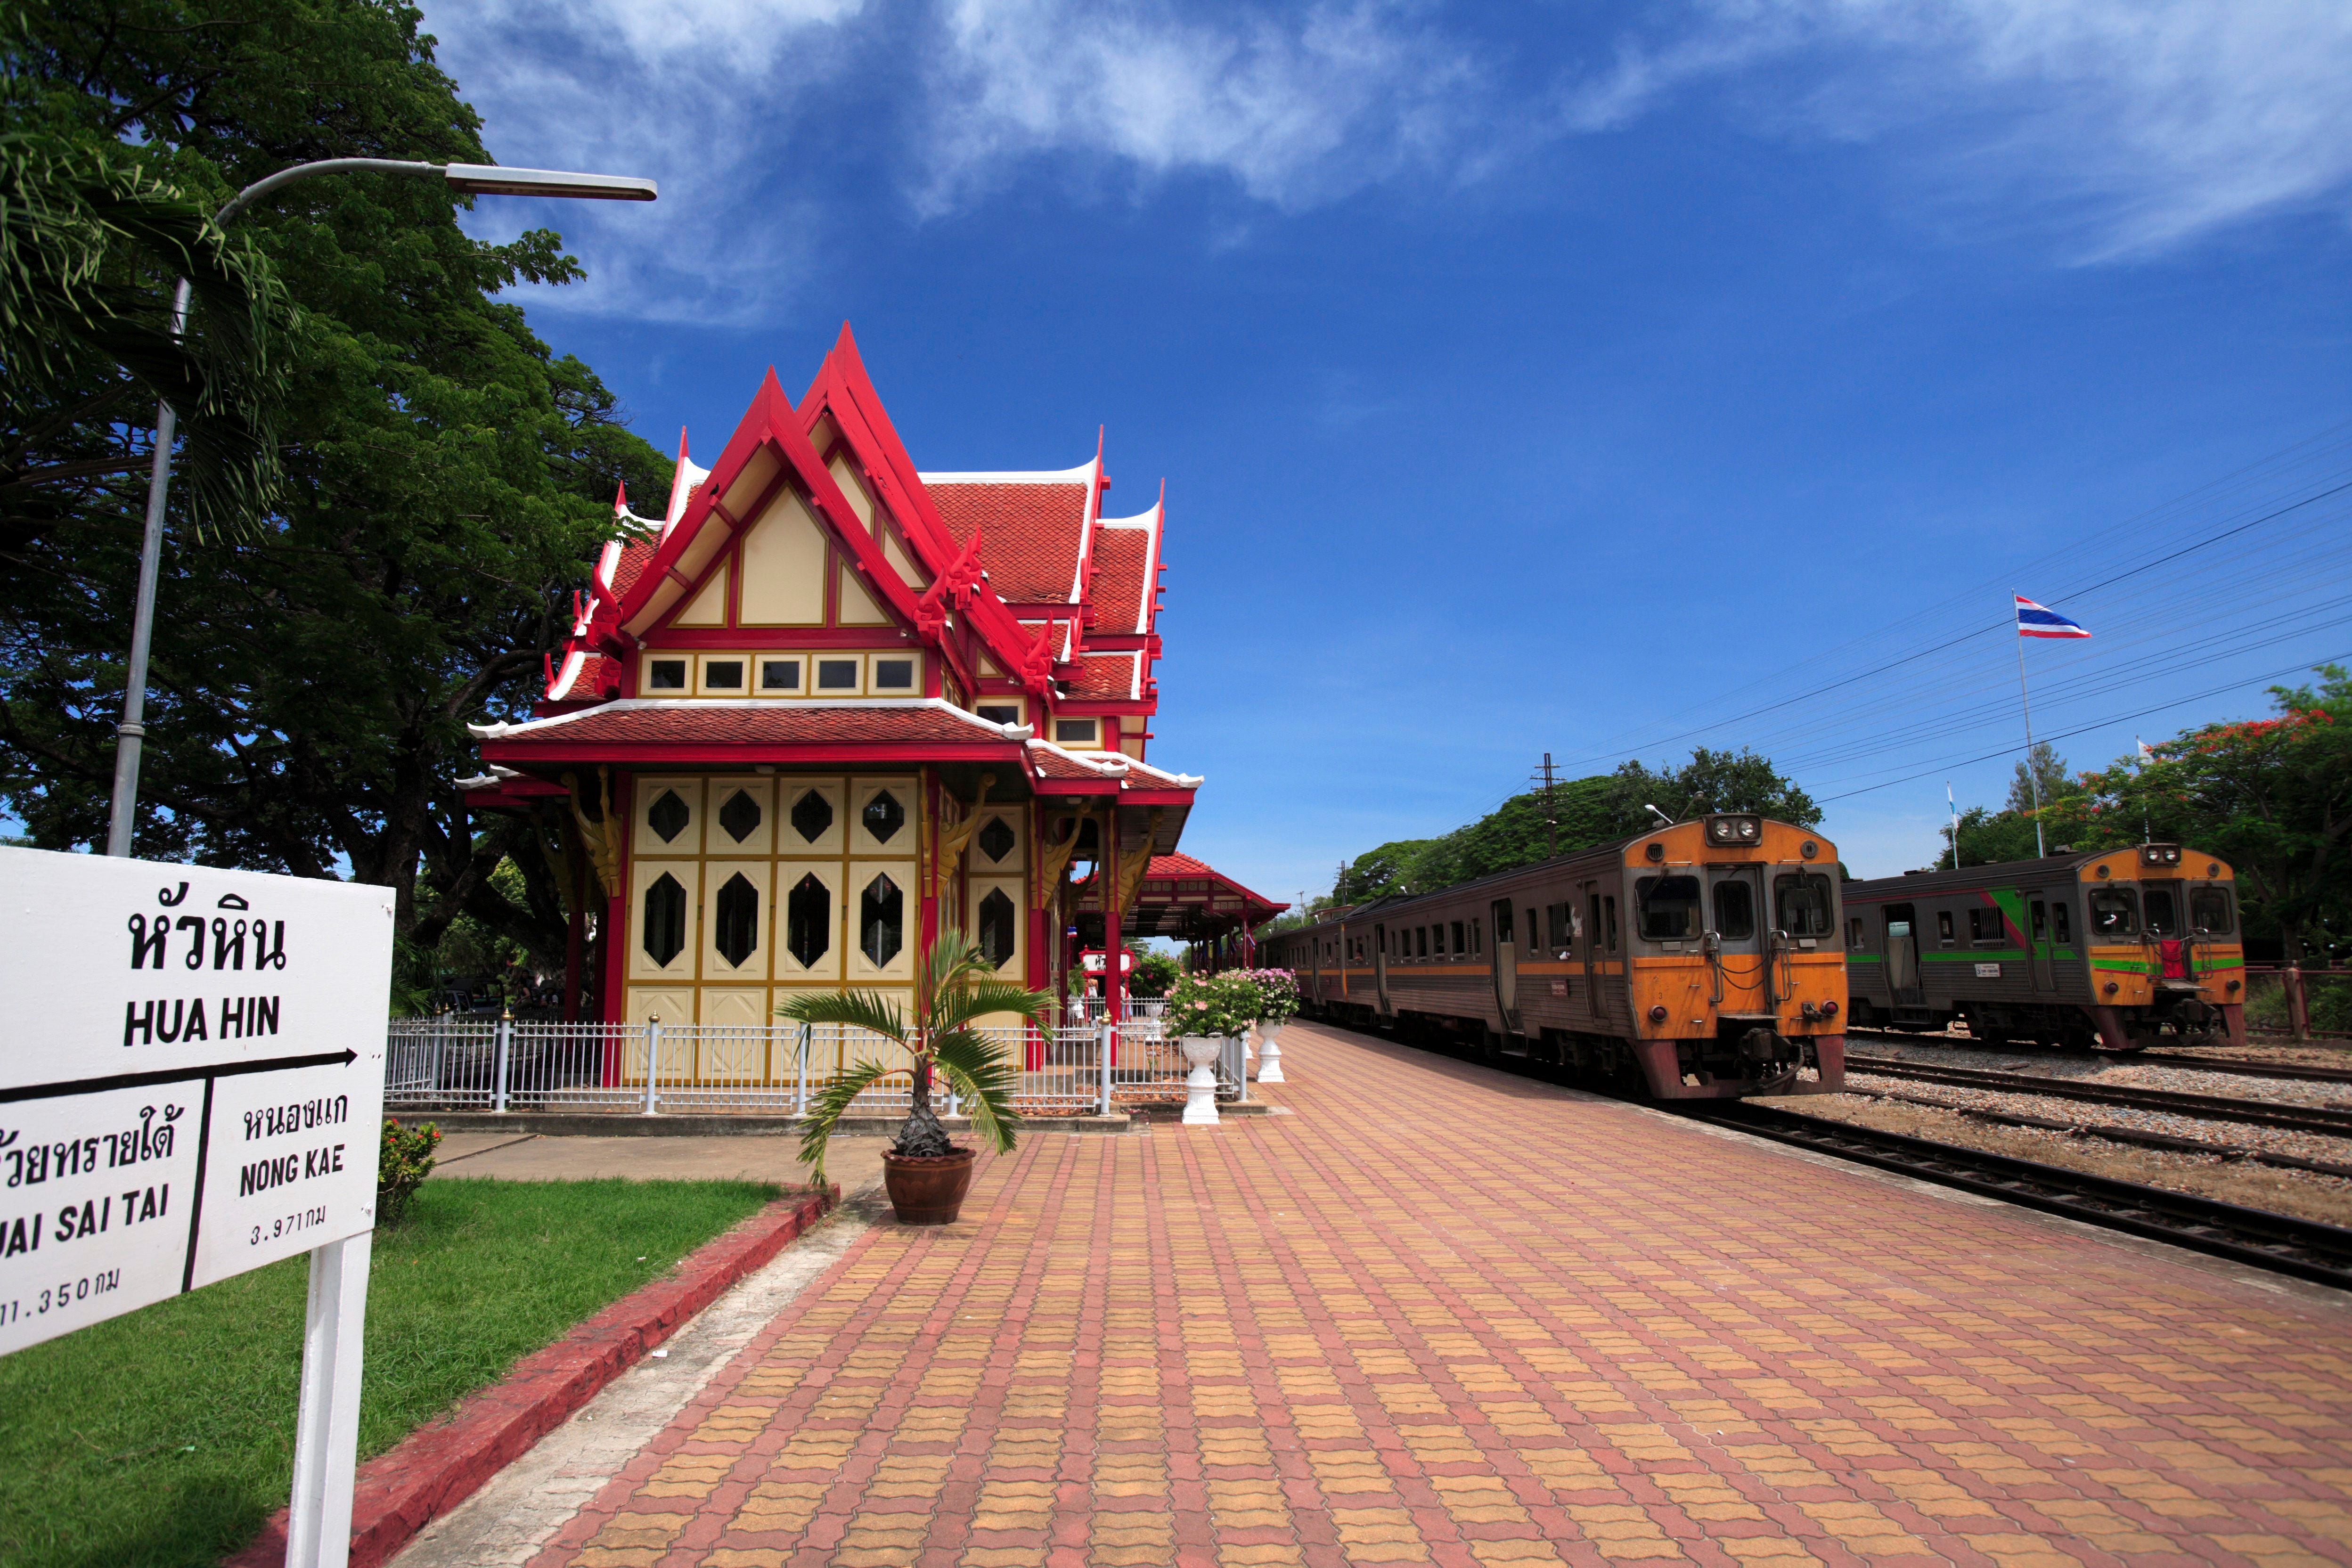 Stop off at Hua Hin Railway Station on your journey though central Thailand